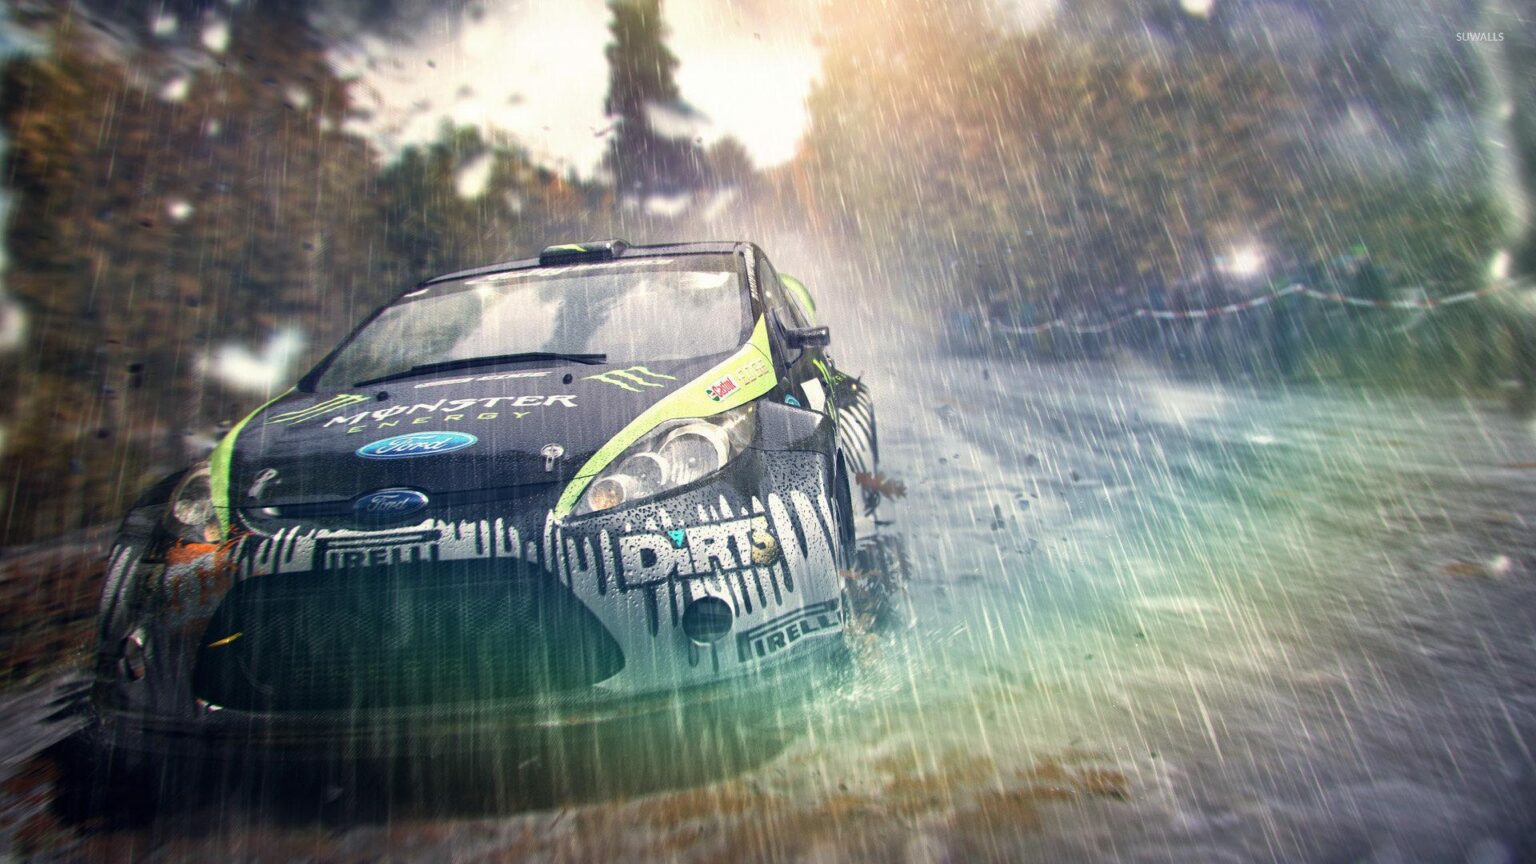 iphone xs max dirt rally images